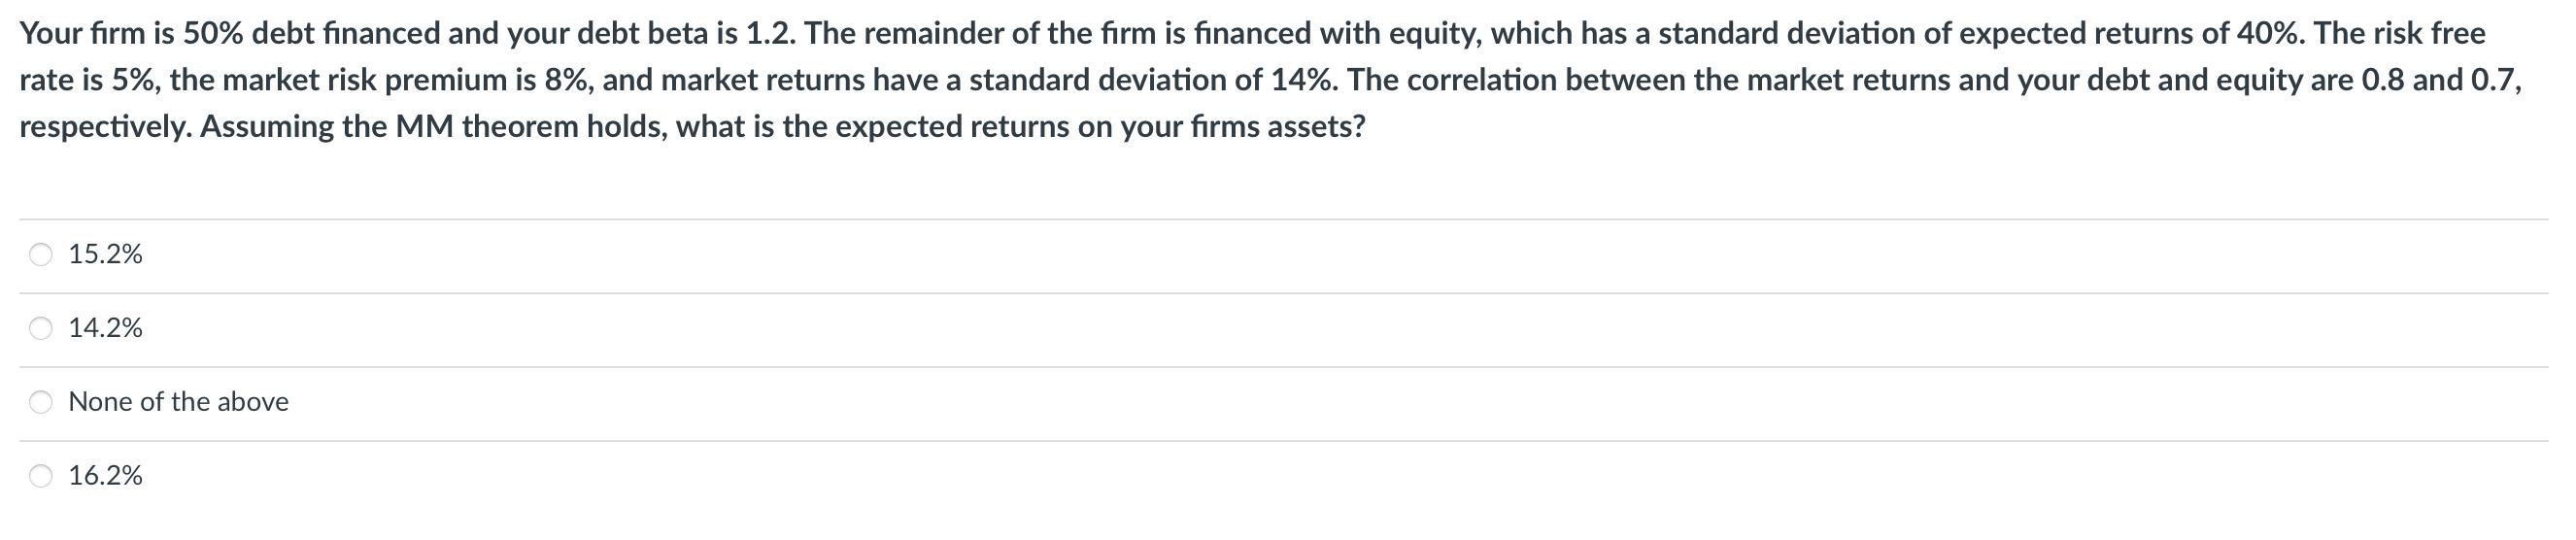 Your firm is 50% debt financed and your debt beta is 1.2. The remainder of the firm is financed with equity, which has a stan